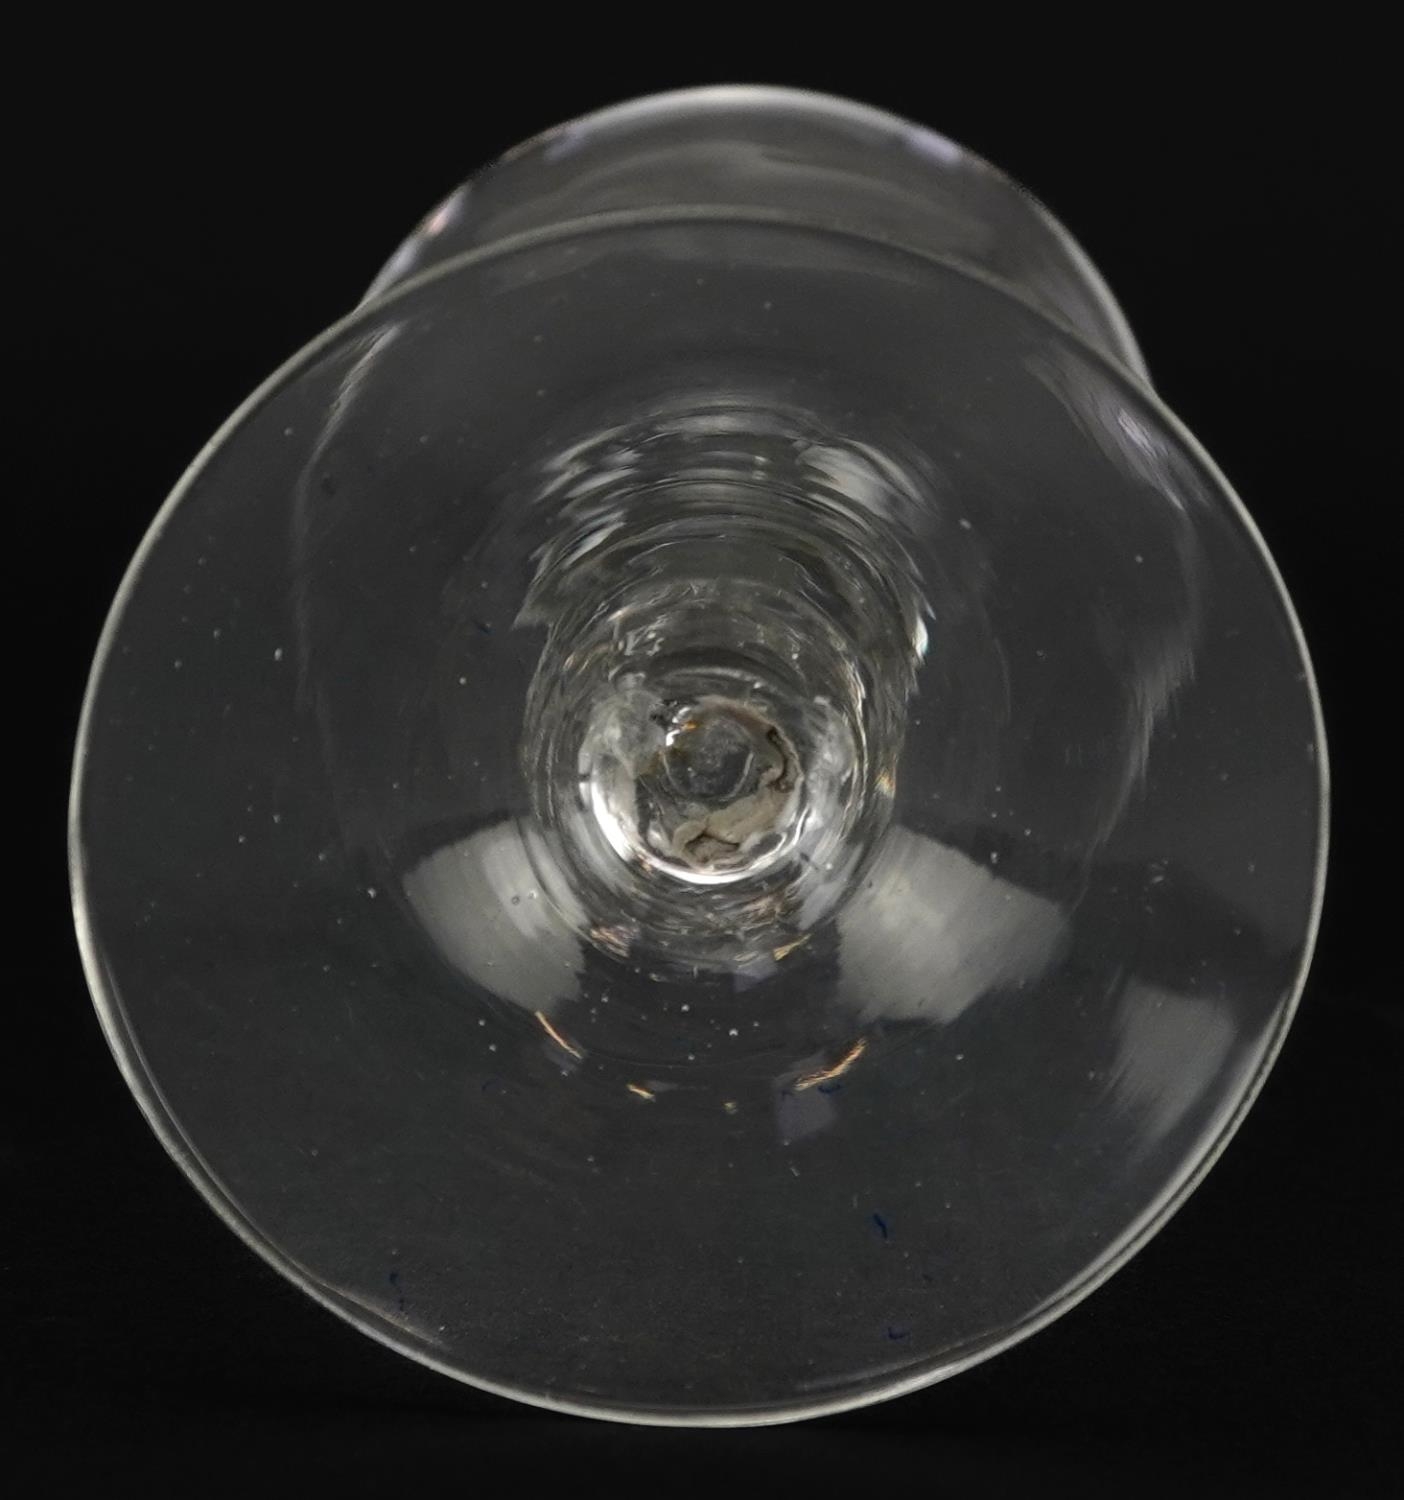 18th century wine glass with multiple knop stem, 17cm high - Image 4 of 4